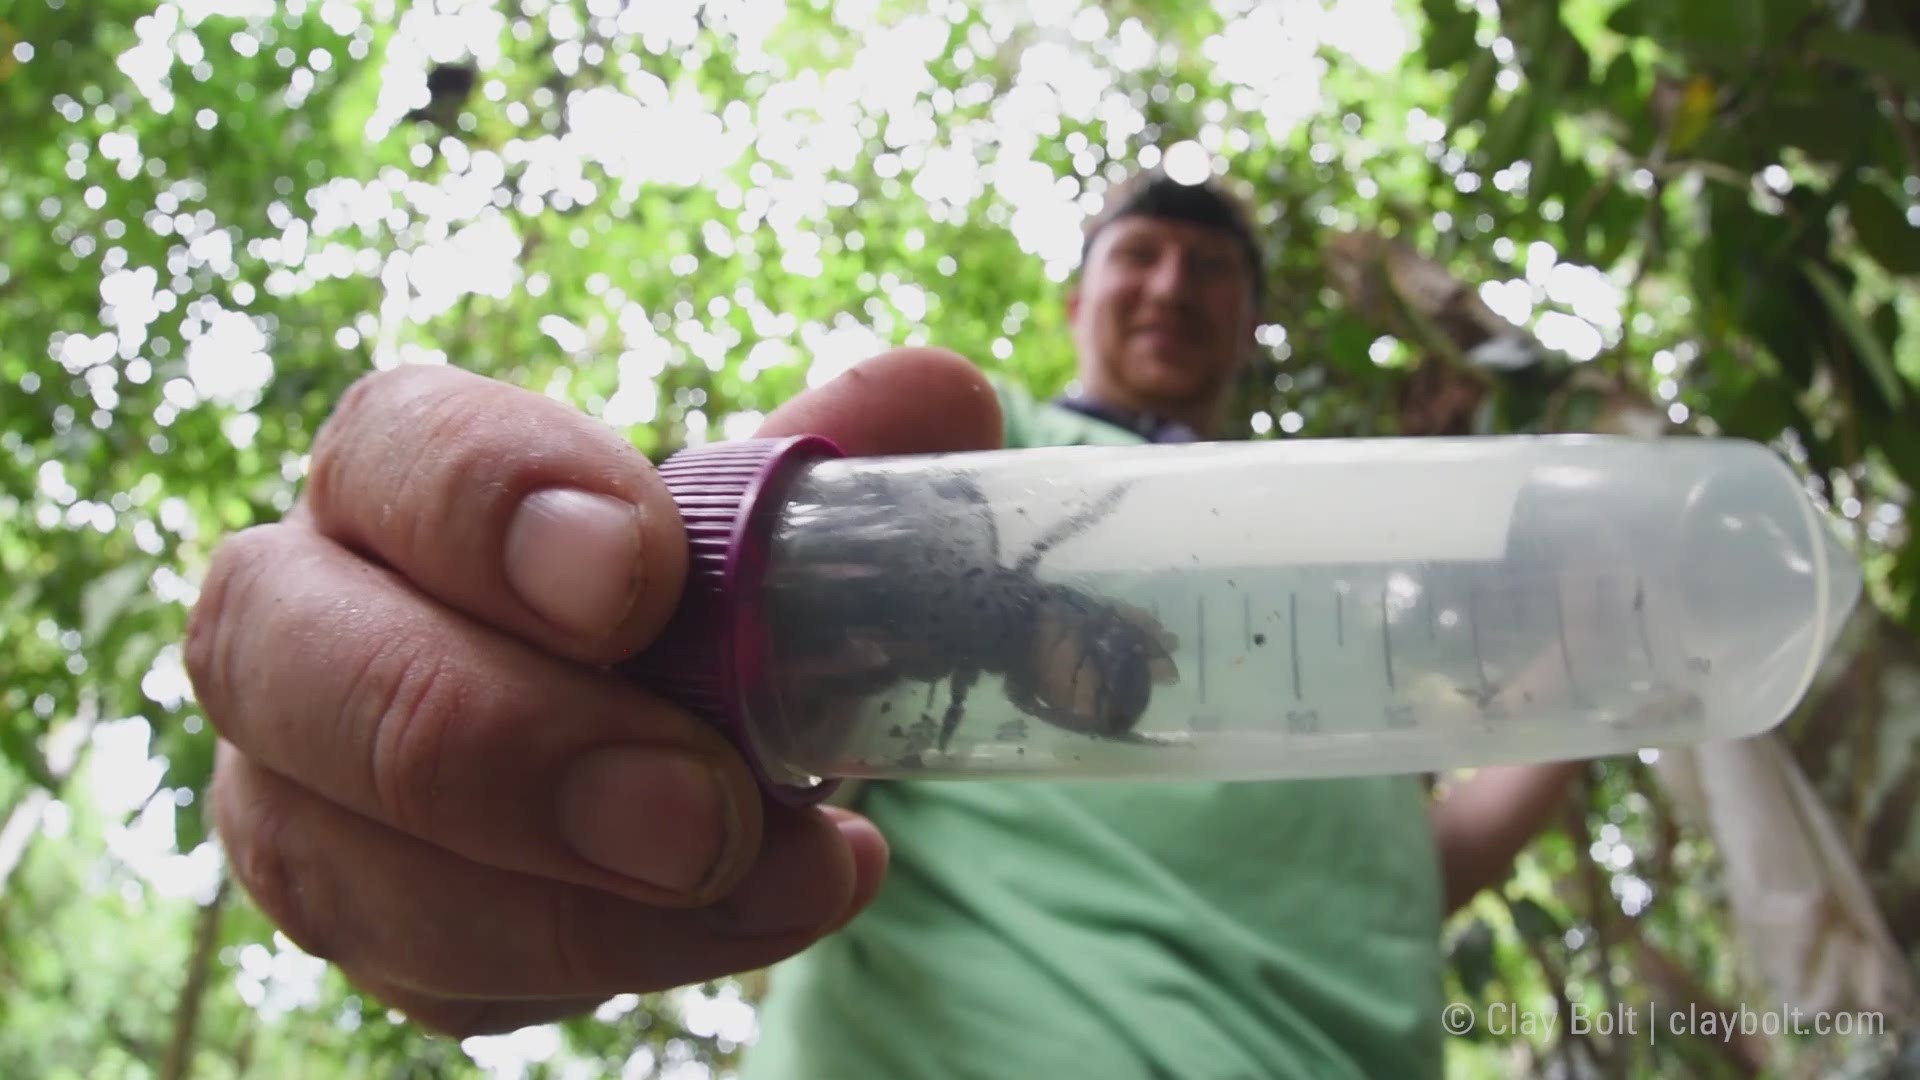 In this video, Clay Bolt shows the rediscovered Wallace's giant bee. It had been lost to science since 1981. Bolt and his team found one in the Indonesian islands known as the North Moluccas.